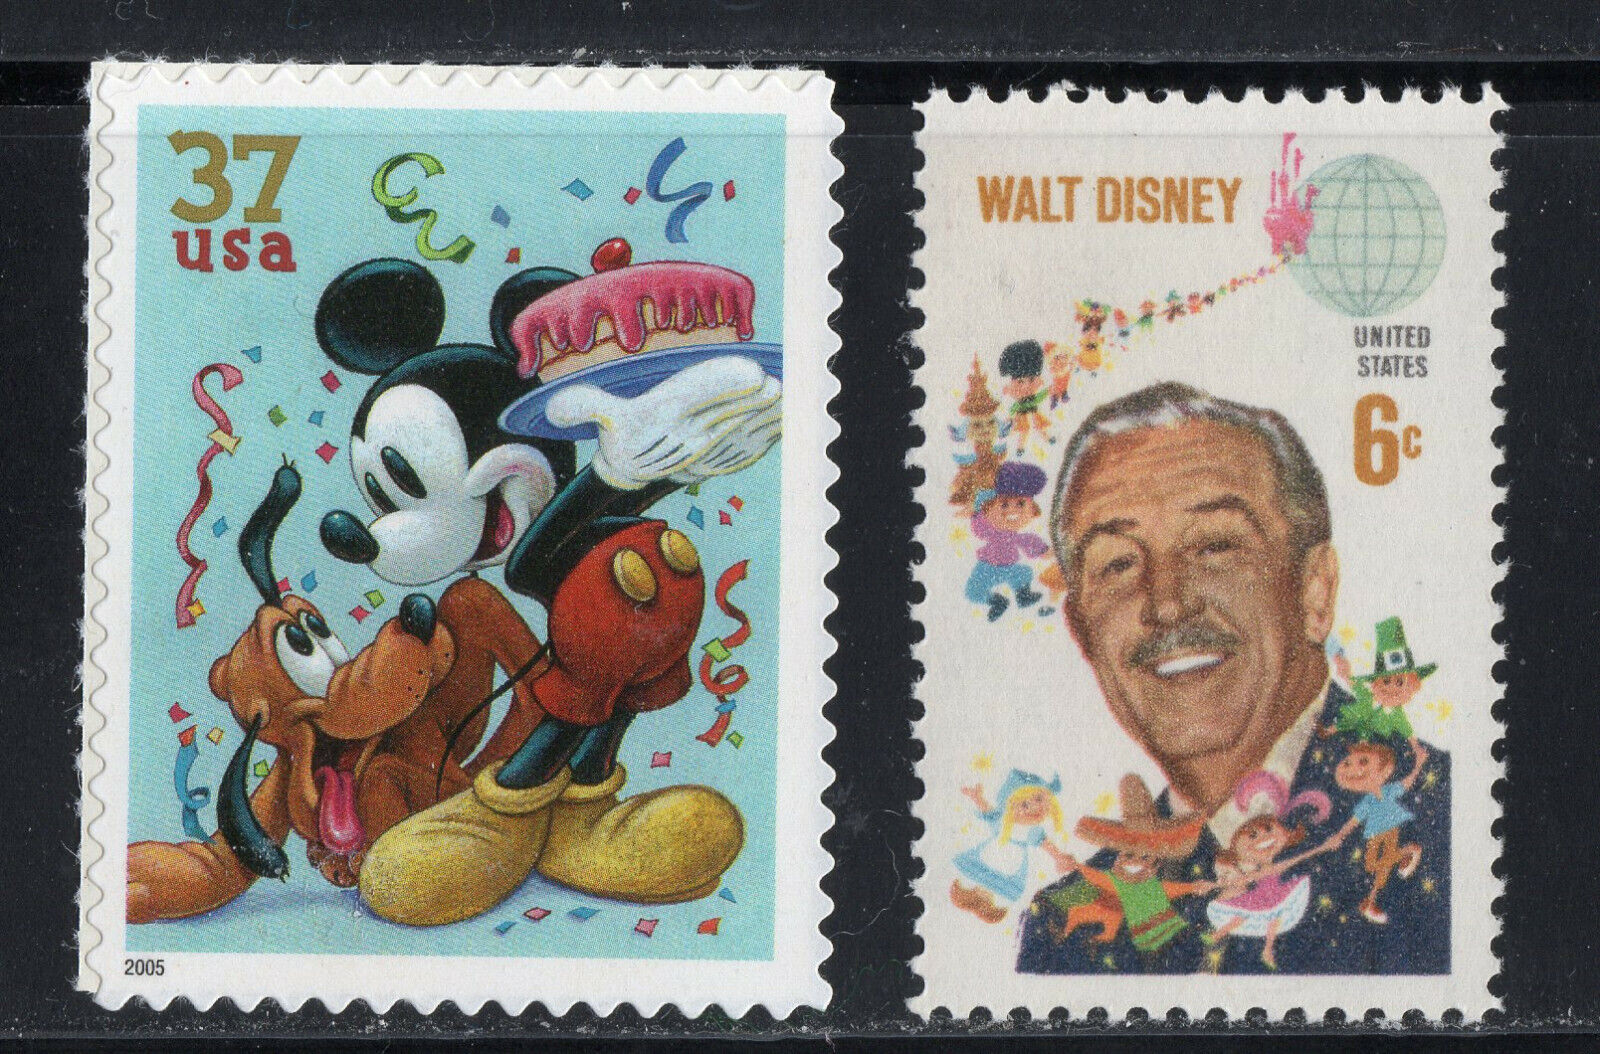 MICKEY MOUSE. PLUTO * WALT DISNEY * US POSTAGE STAMPS MINT